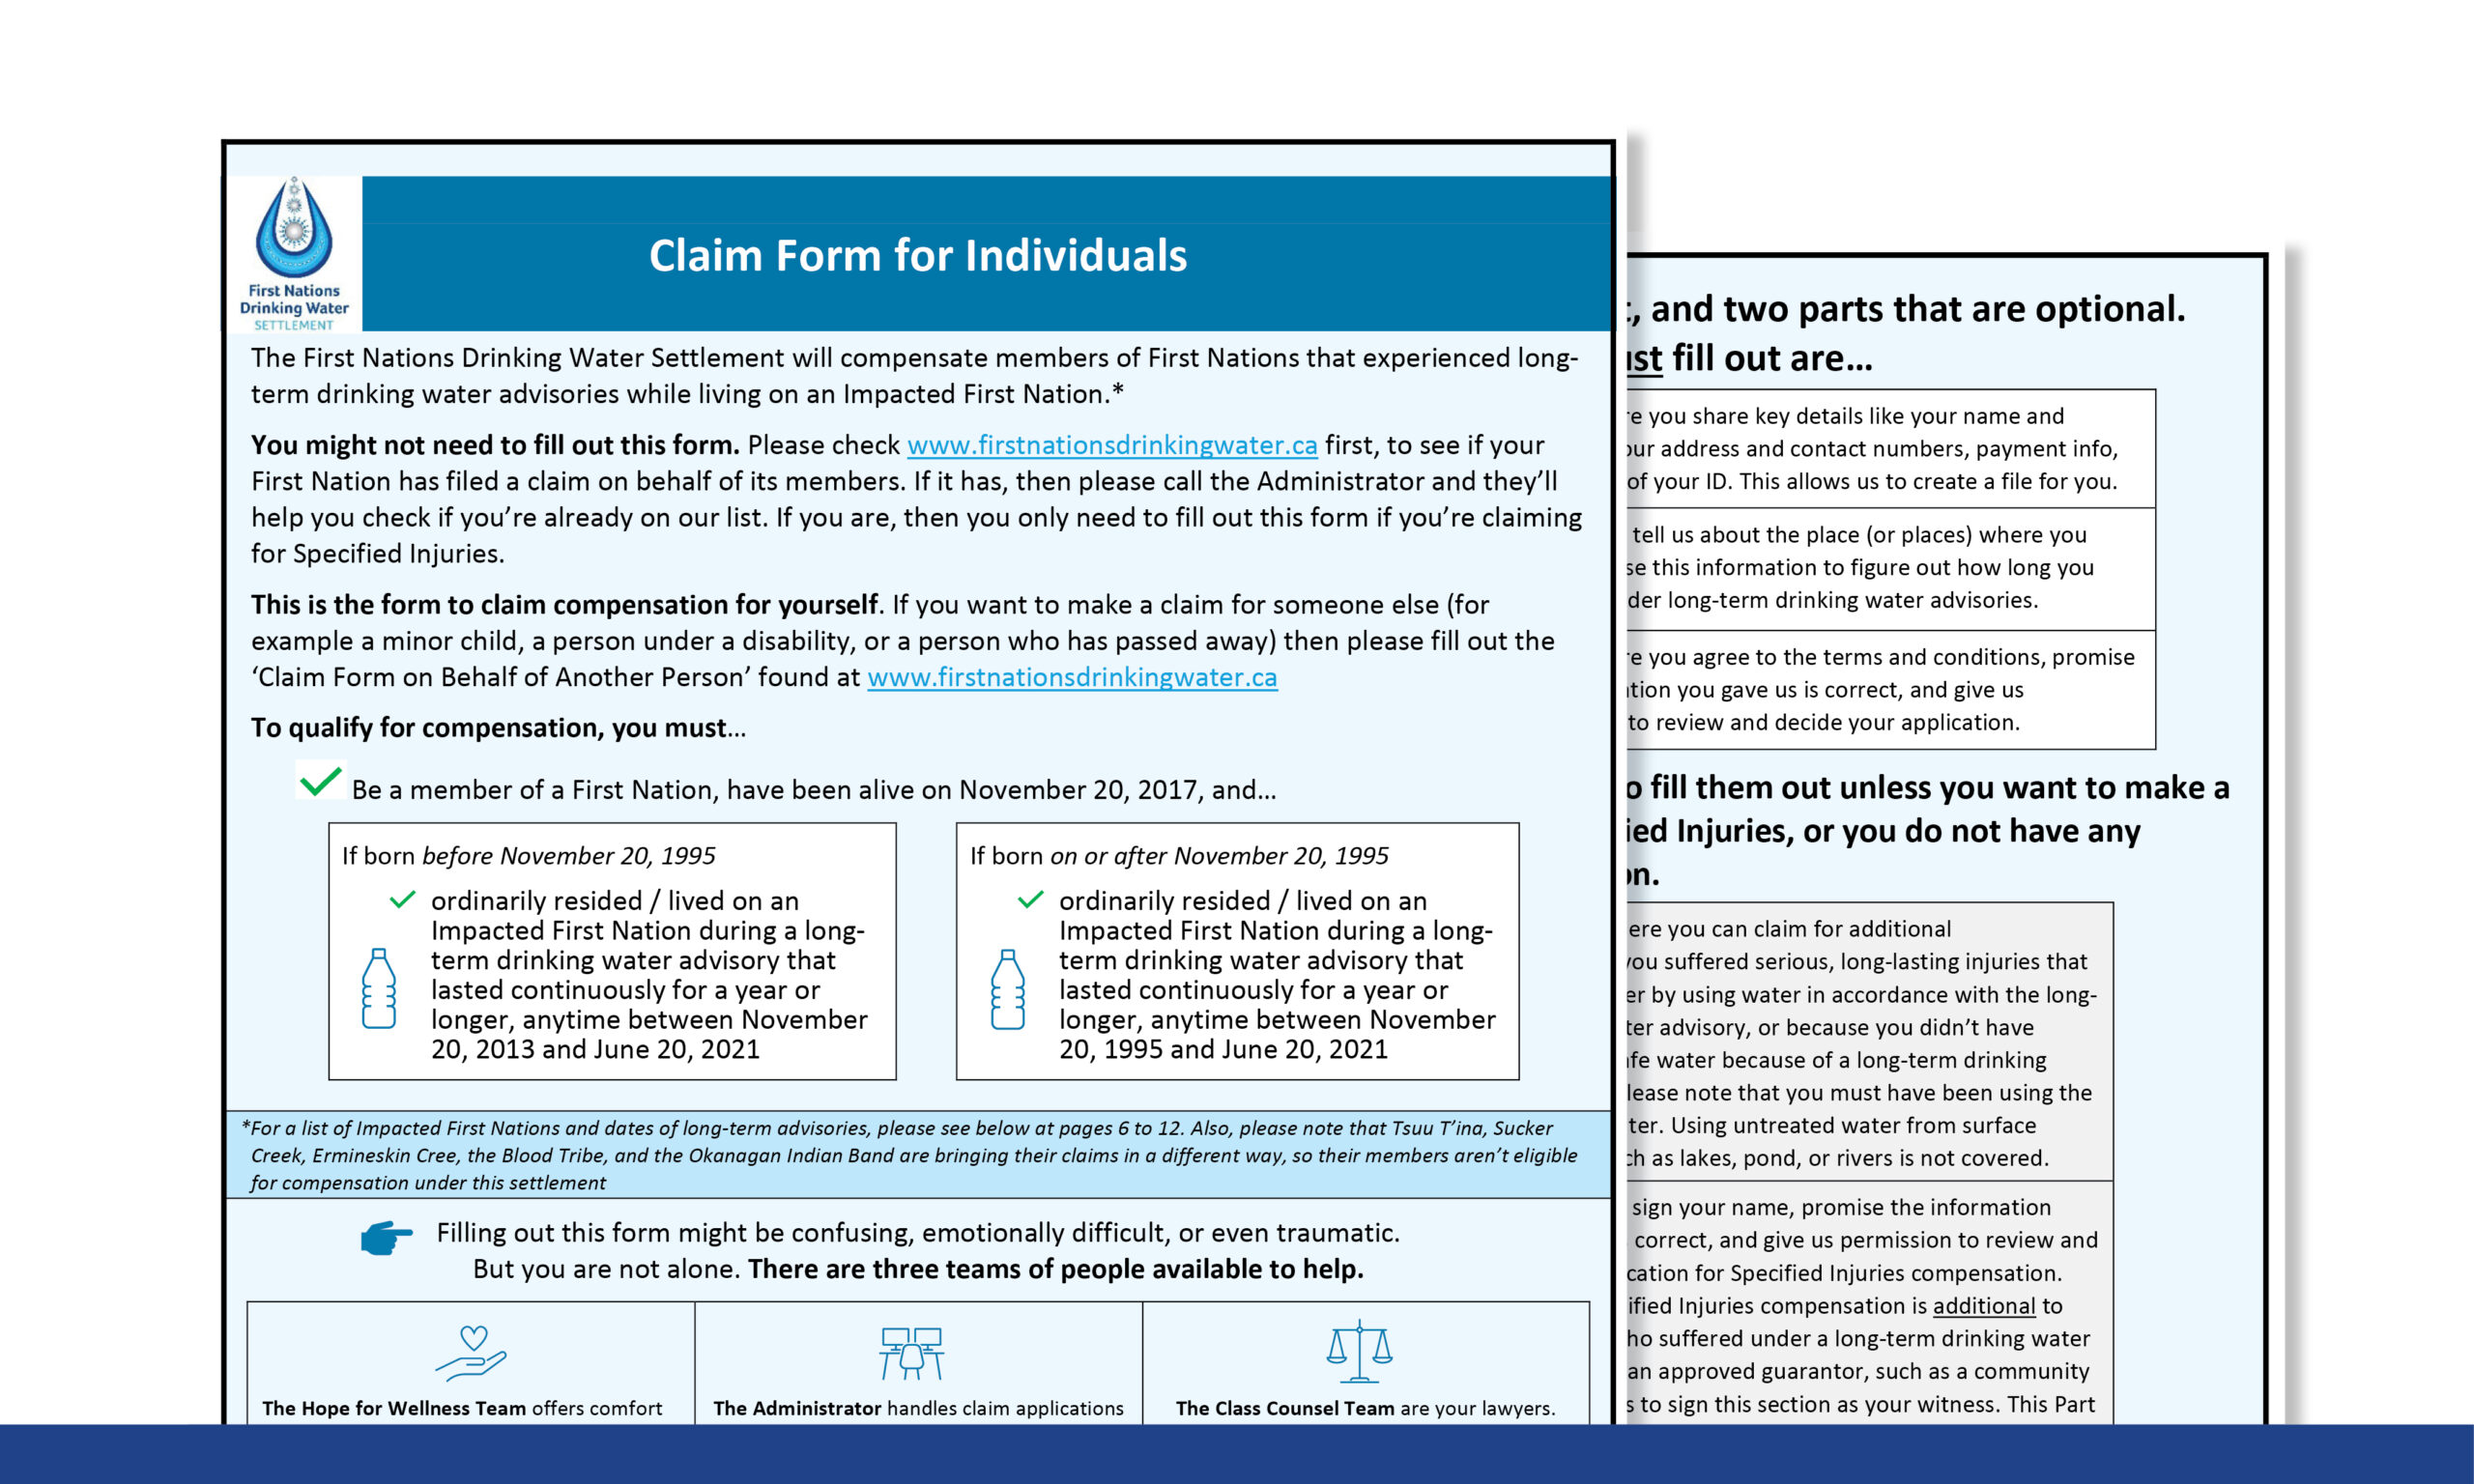 claim-form-individual-first-nations-drinking-water